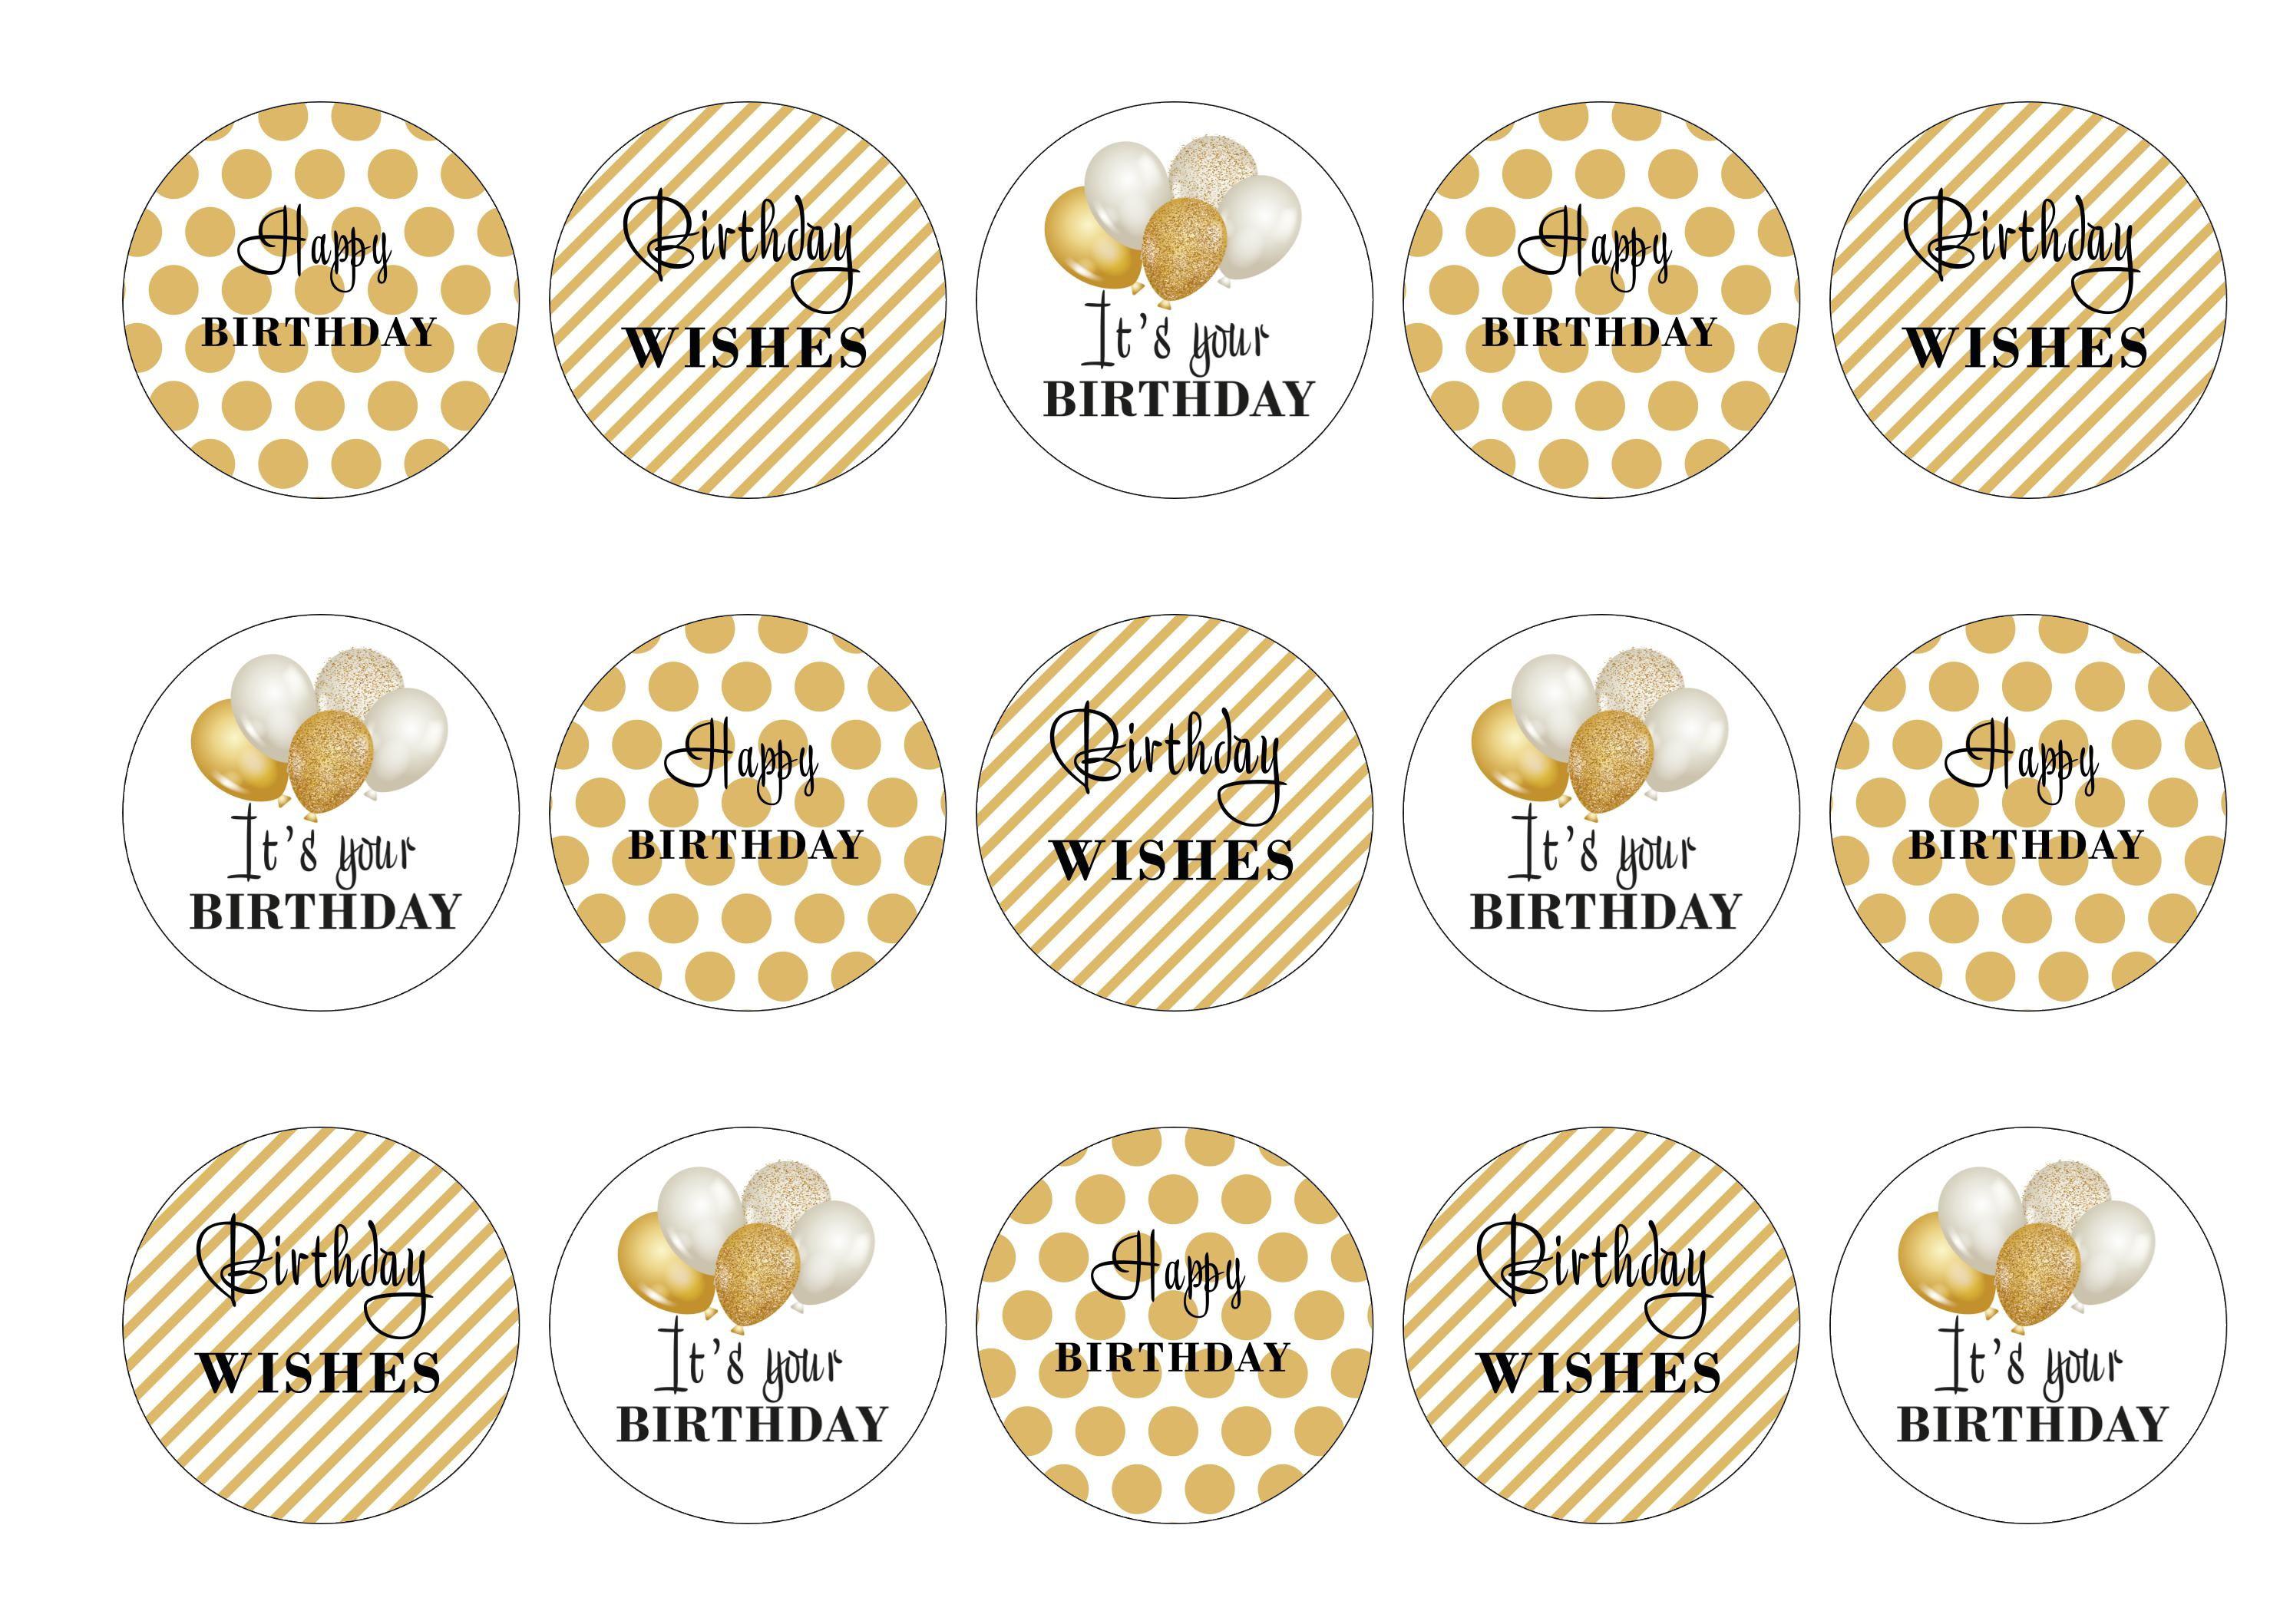 15 printed toppers with gold spots,gold stripes and gold balloons for a happy birthday